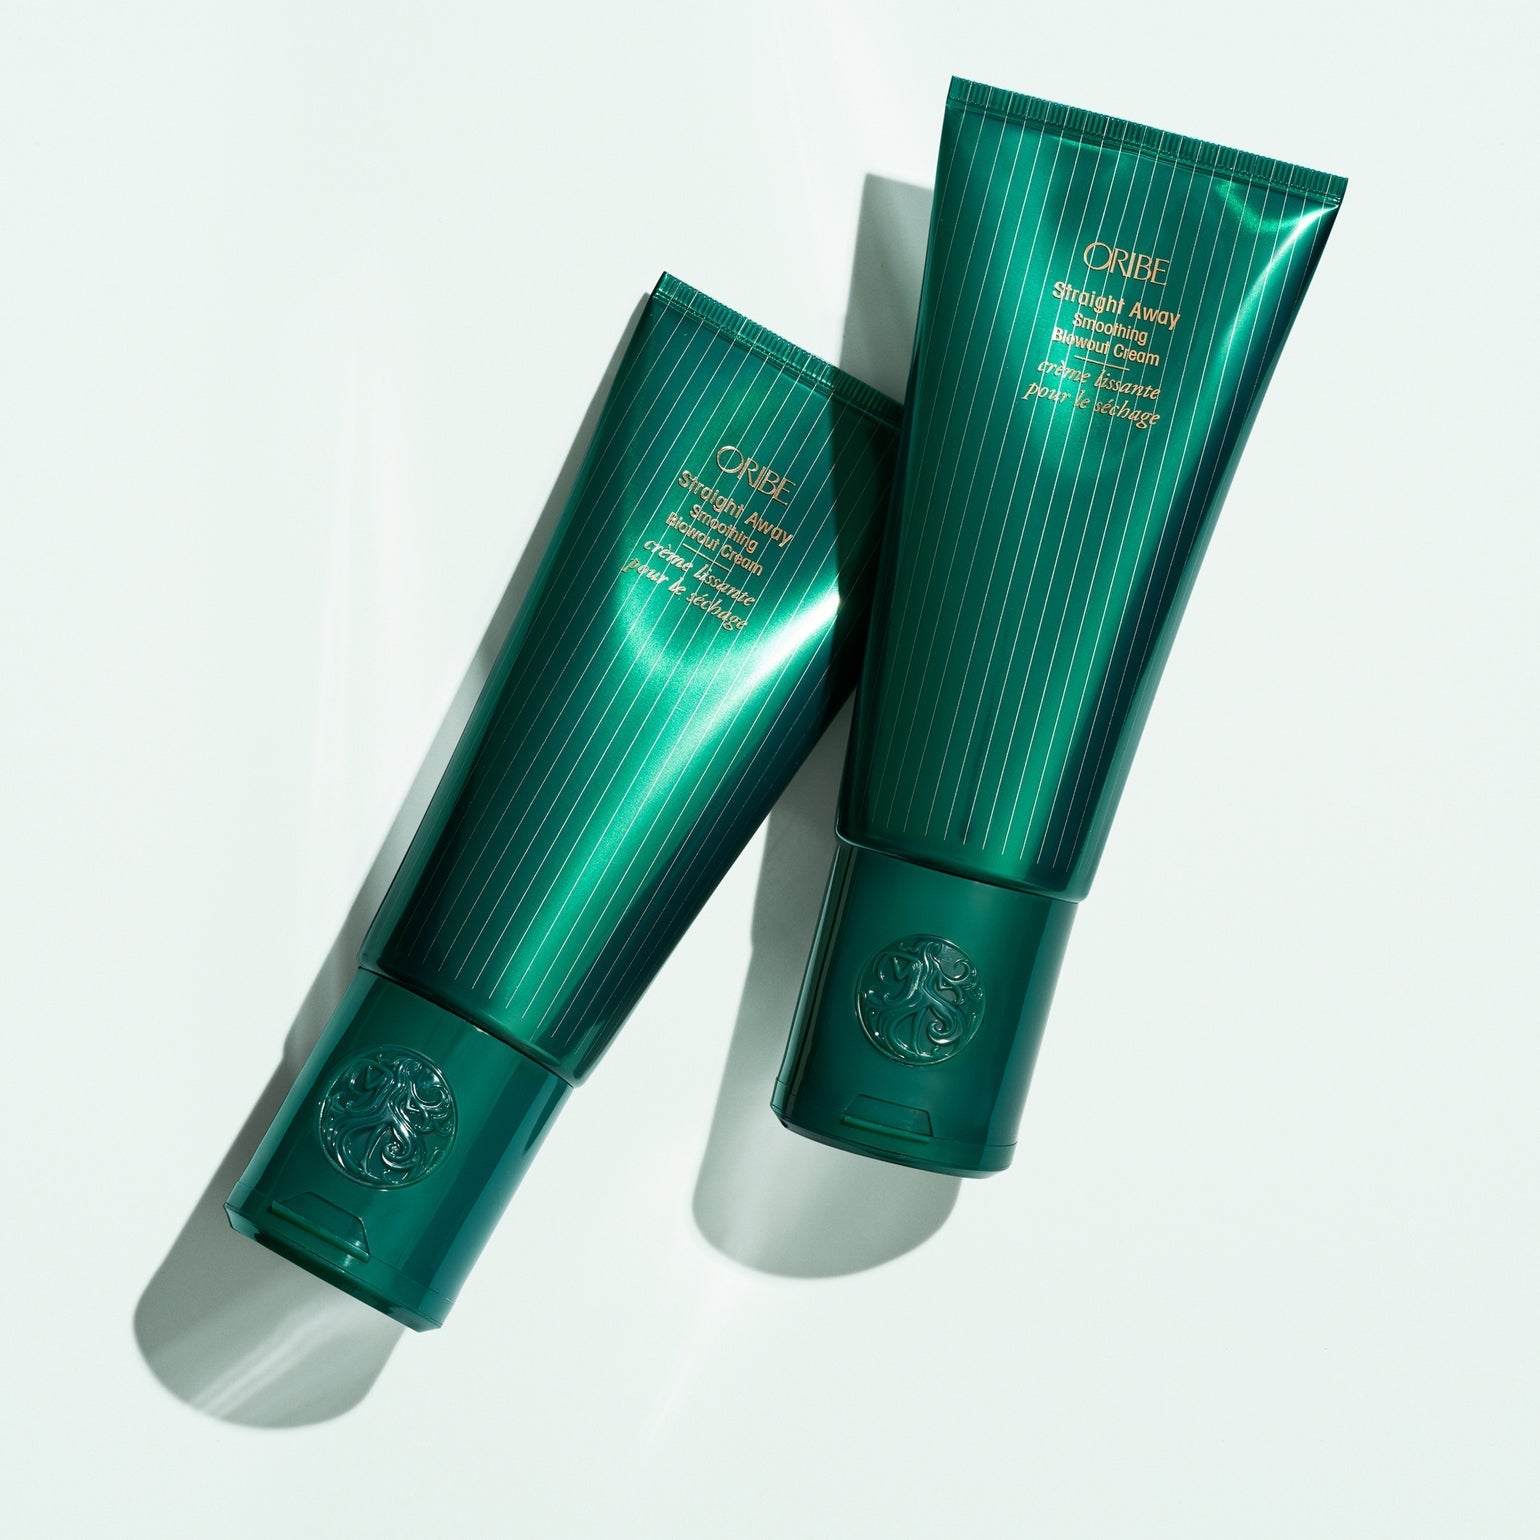 Straight Away Smoothing Blowout Cream - Oribe Hair Care